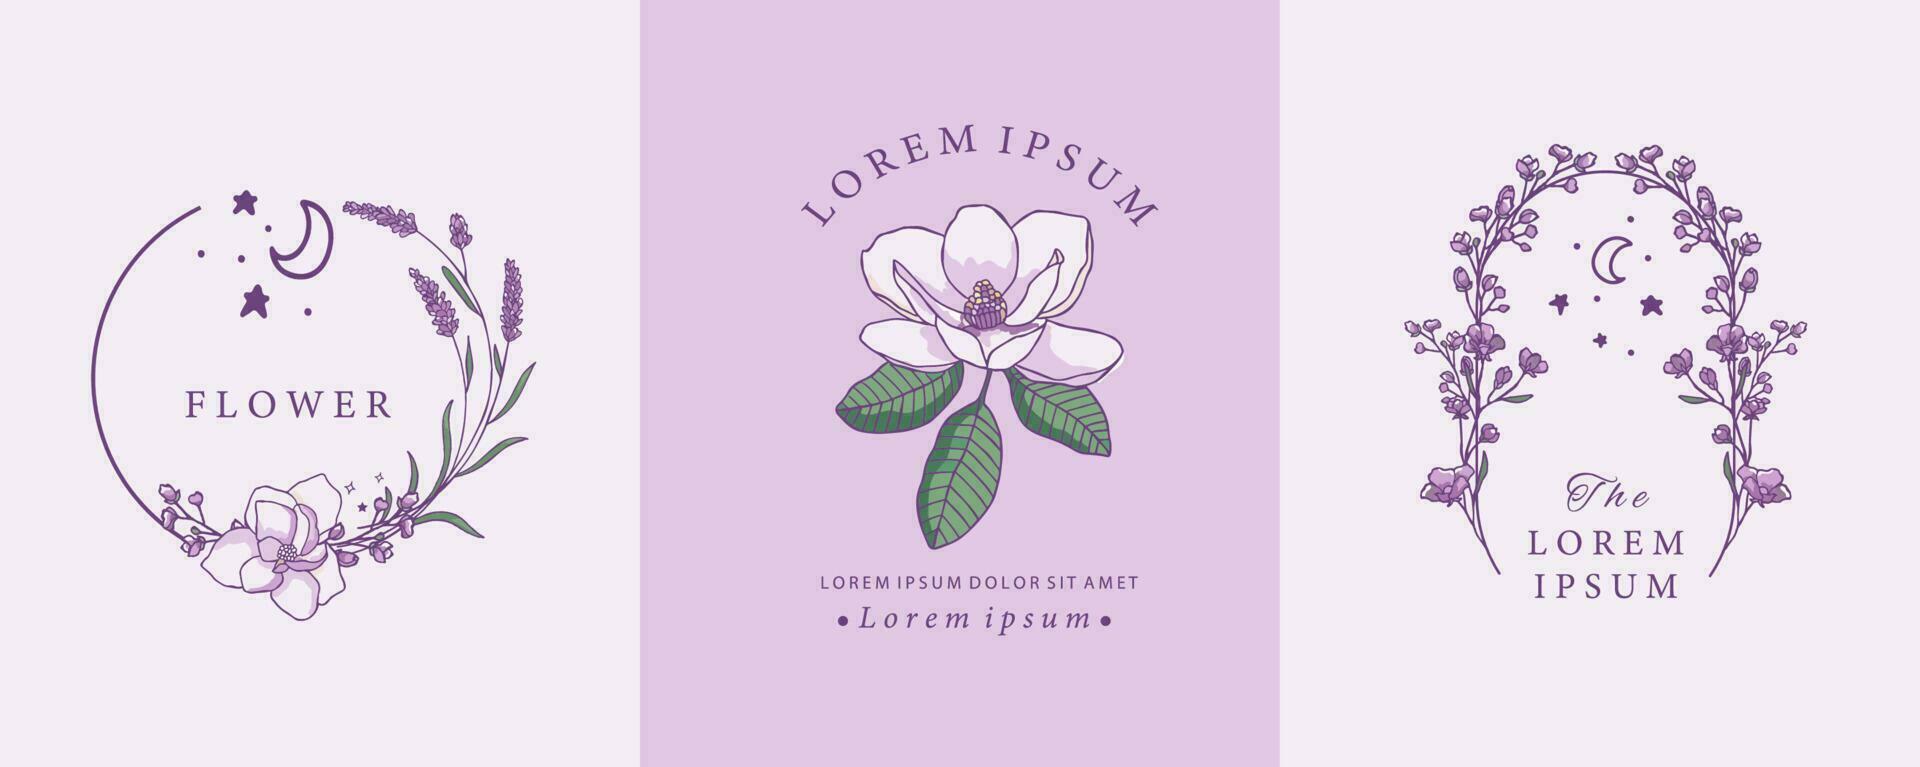 lavender and magnolia design with circle shape vector